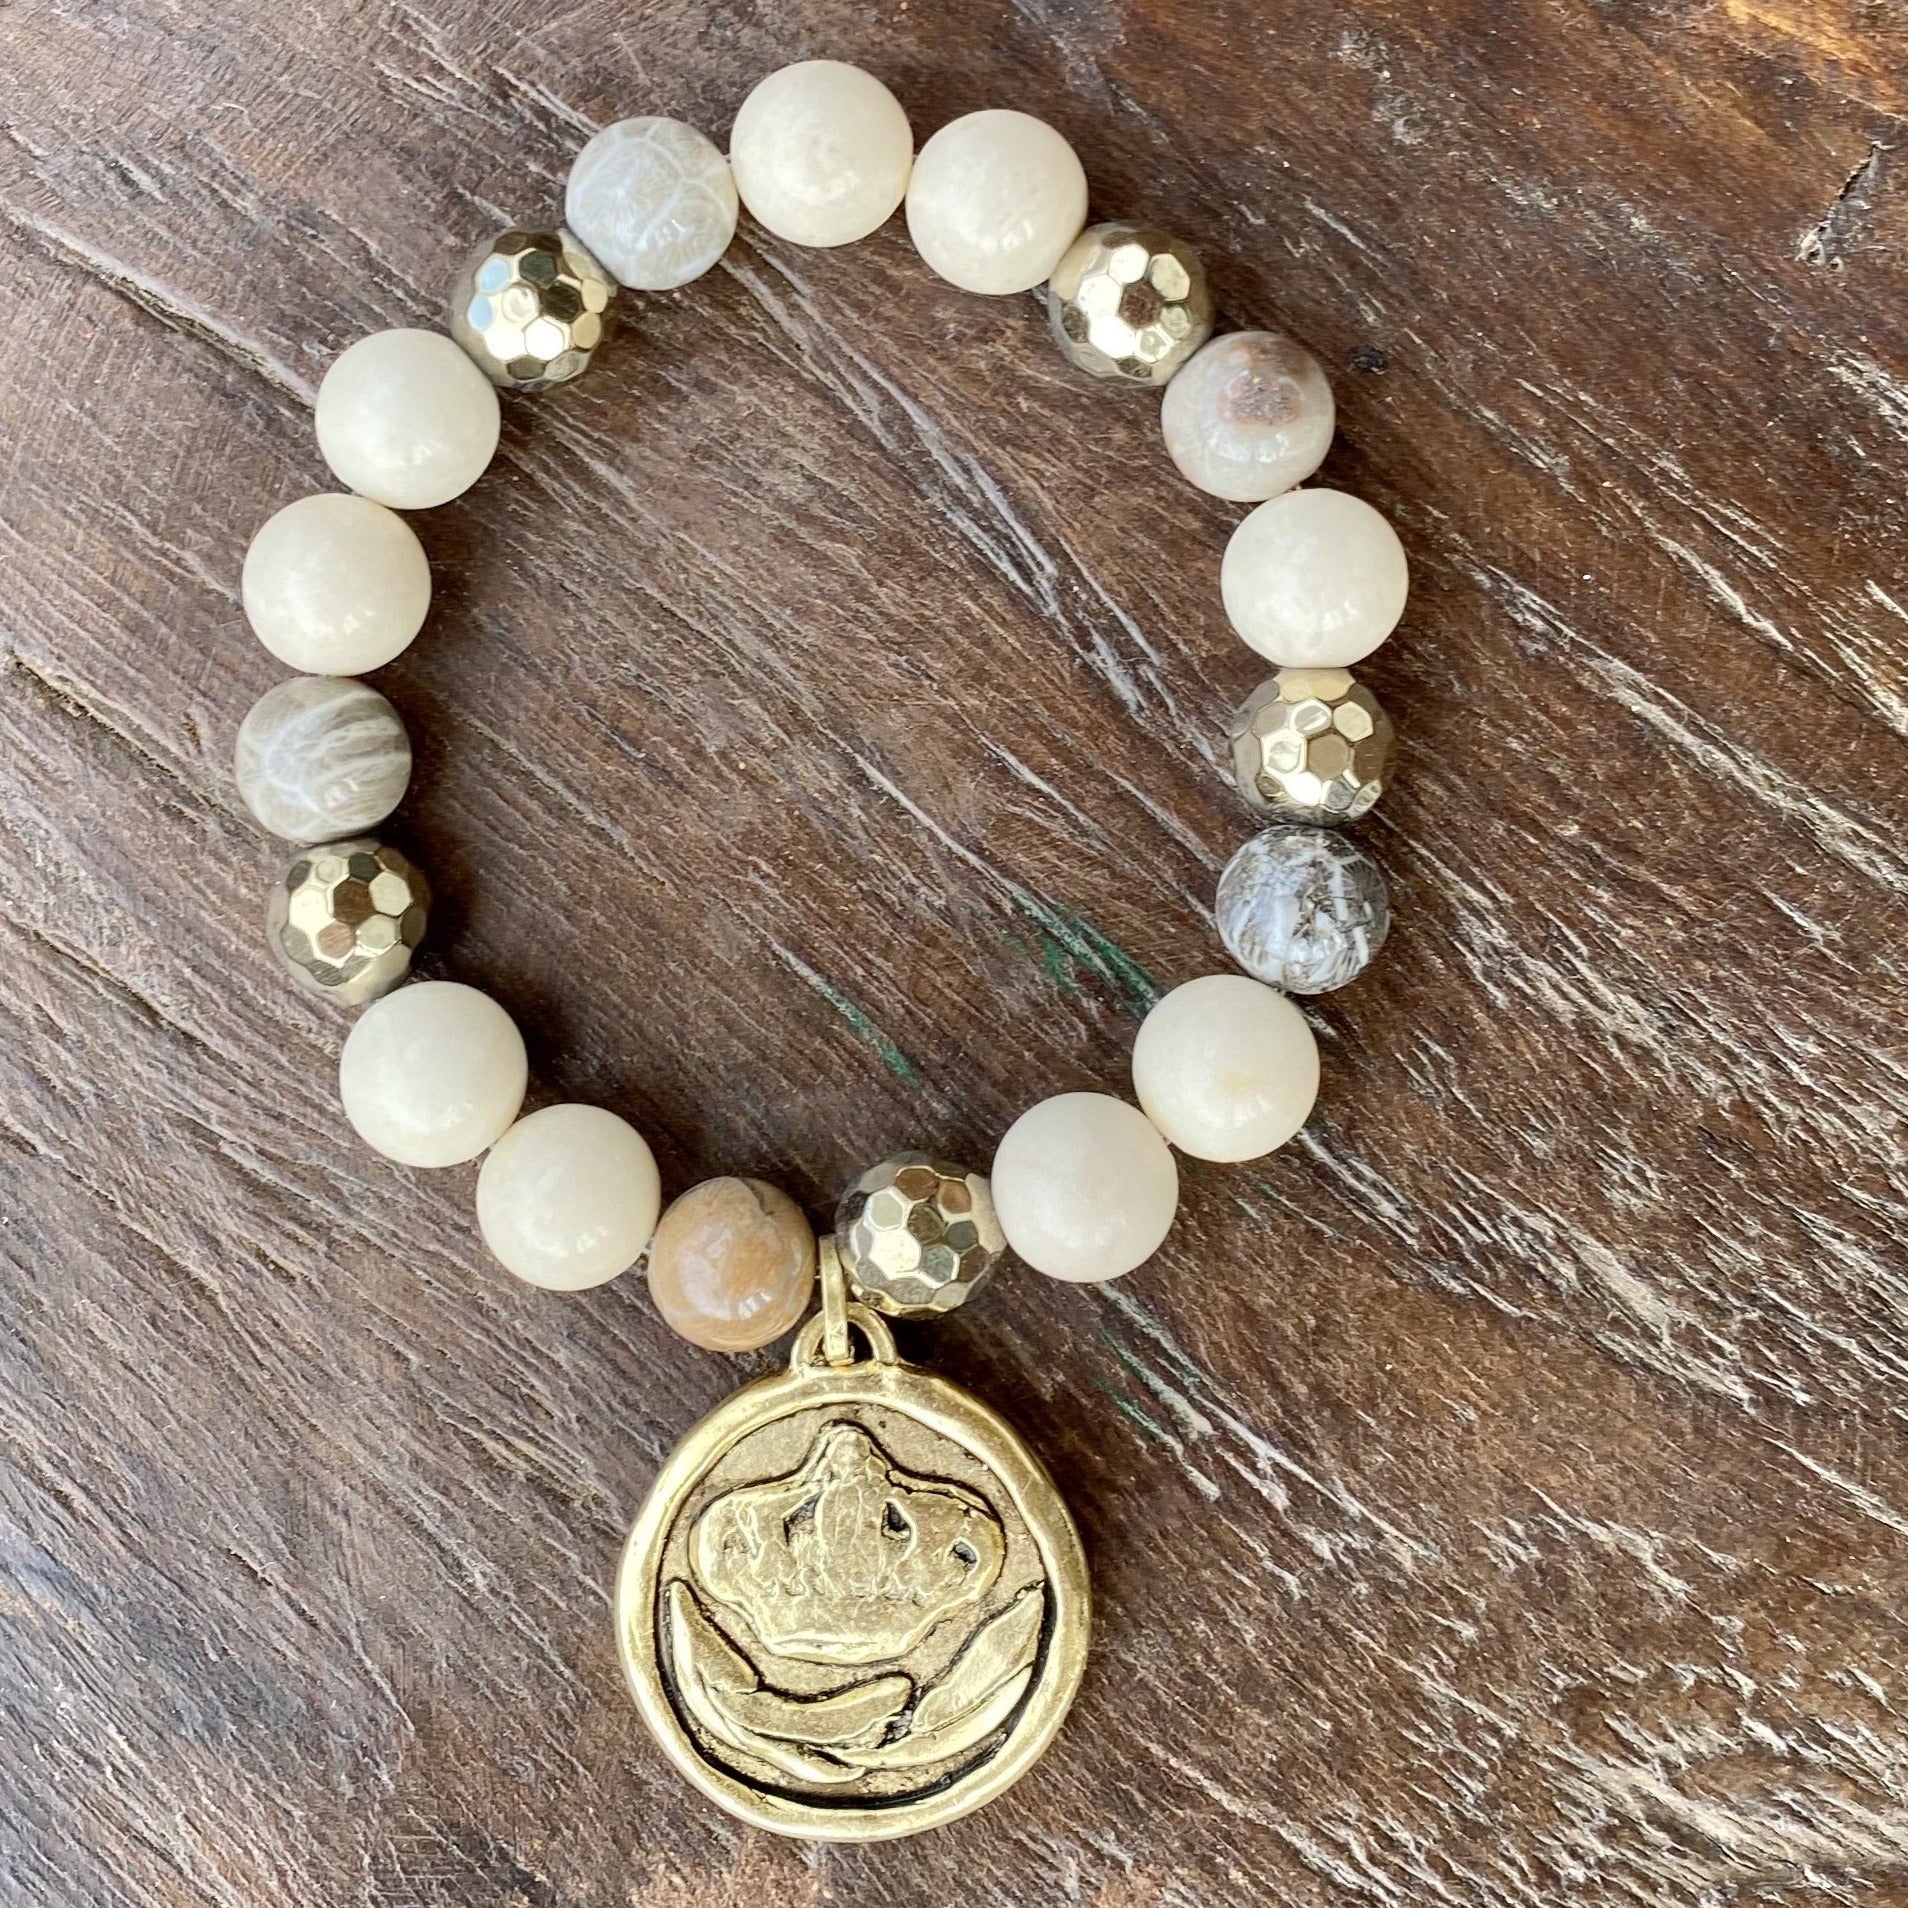 Beaded Bracelet with Hammered Gold Charm